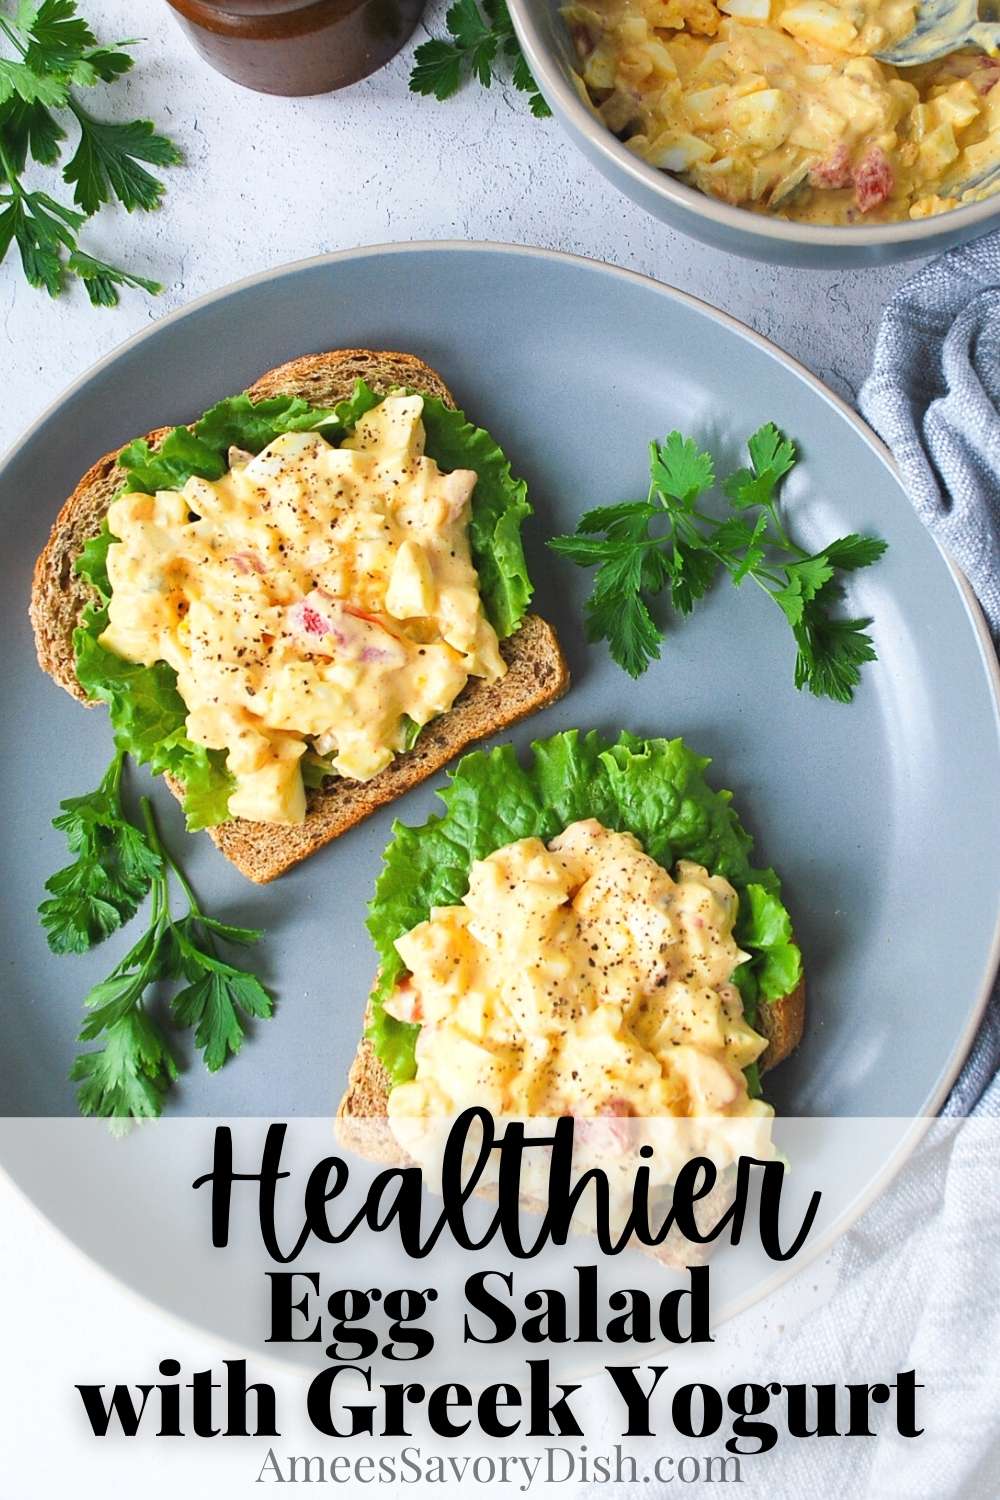 A simple recipe for egg salad made with Greek yogurt, mayonnaise, dijon mustard, relish, and roasted red peppers.  This tasty egg salad recipe is perfect for meal prep! via @Ameessavorydish